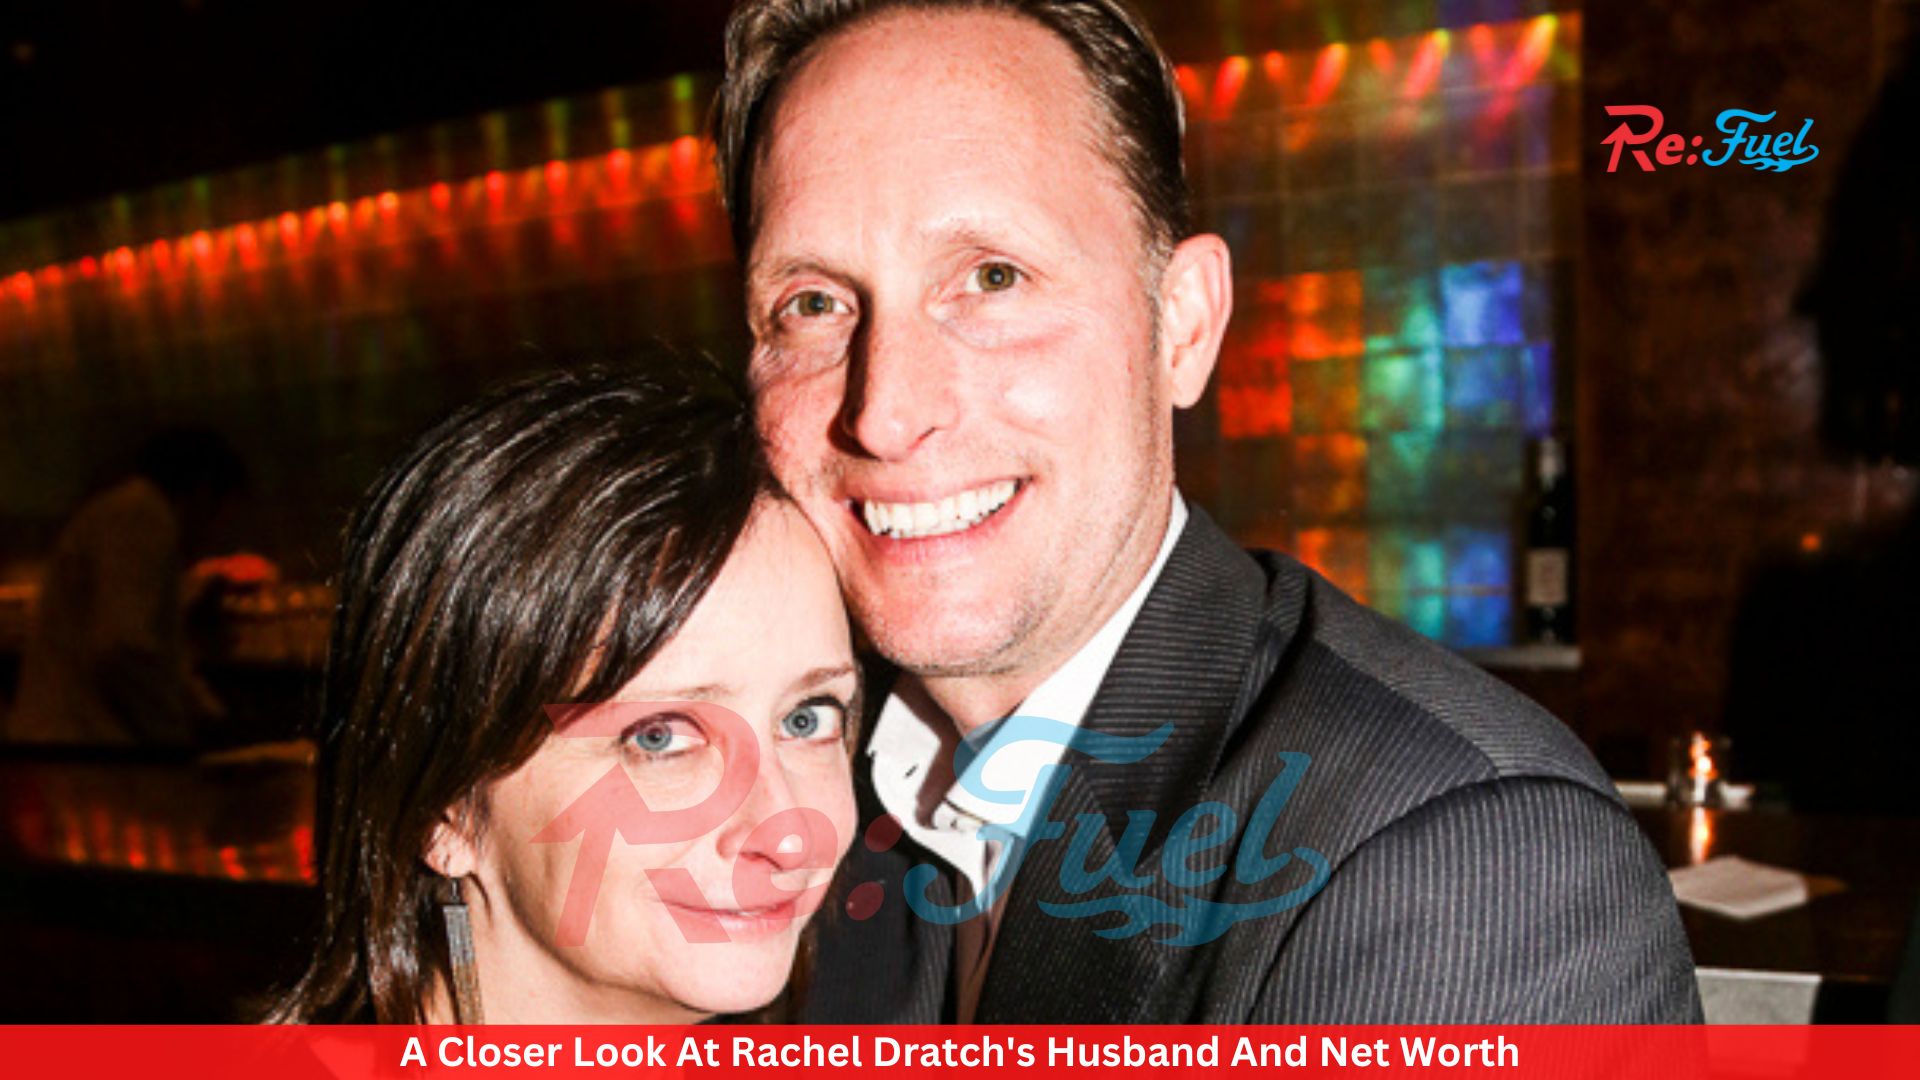 A Closer Look At Rachel Dratch's Husband And Net Worth